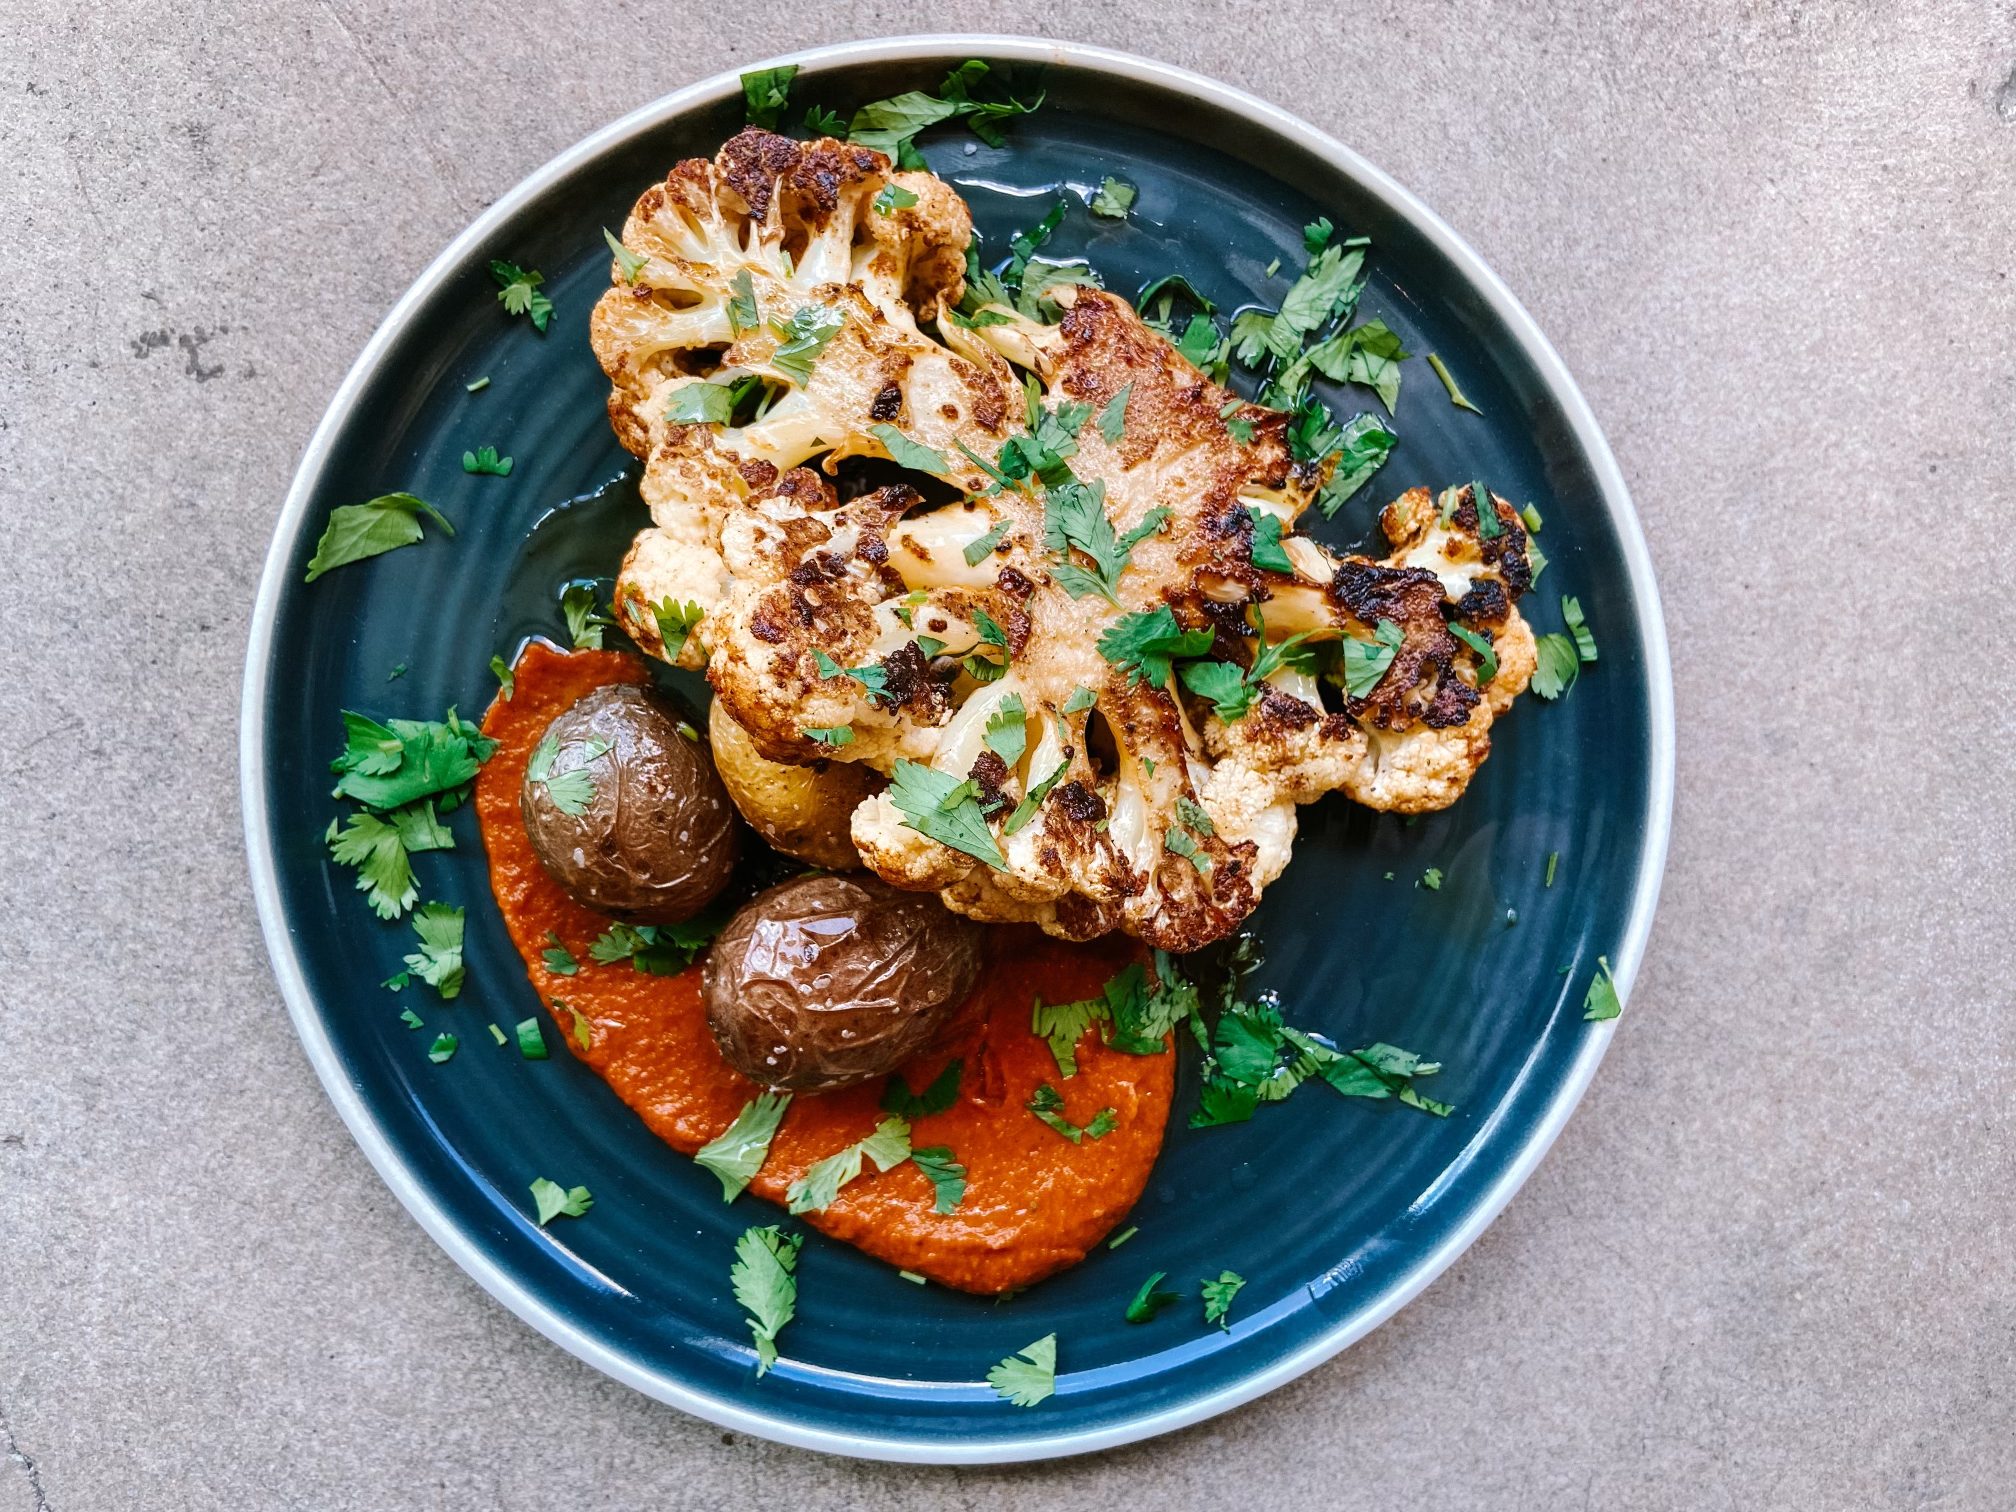 A big slice of cauliflower covered in herbs next to an orange sauce on a blue plate.